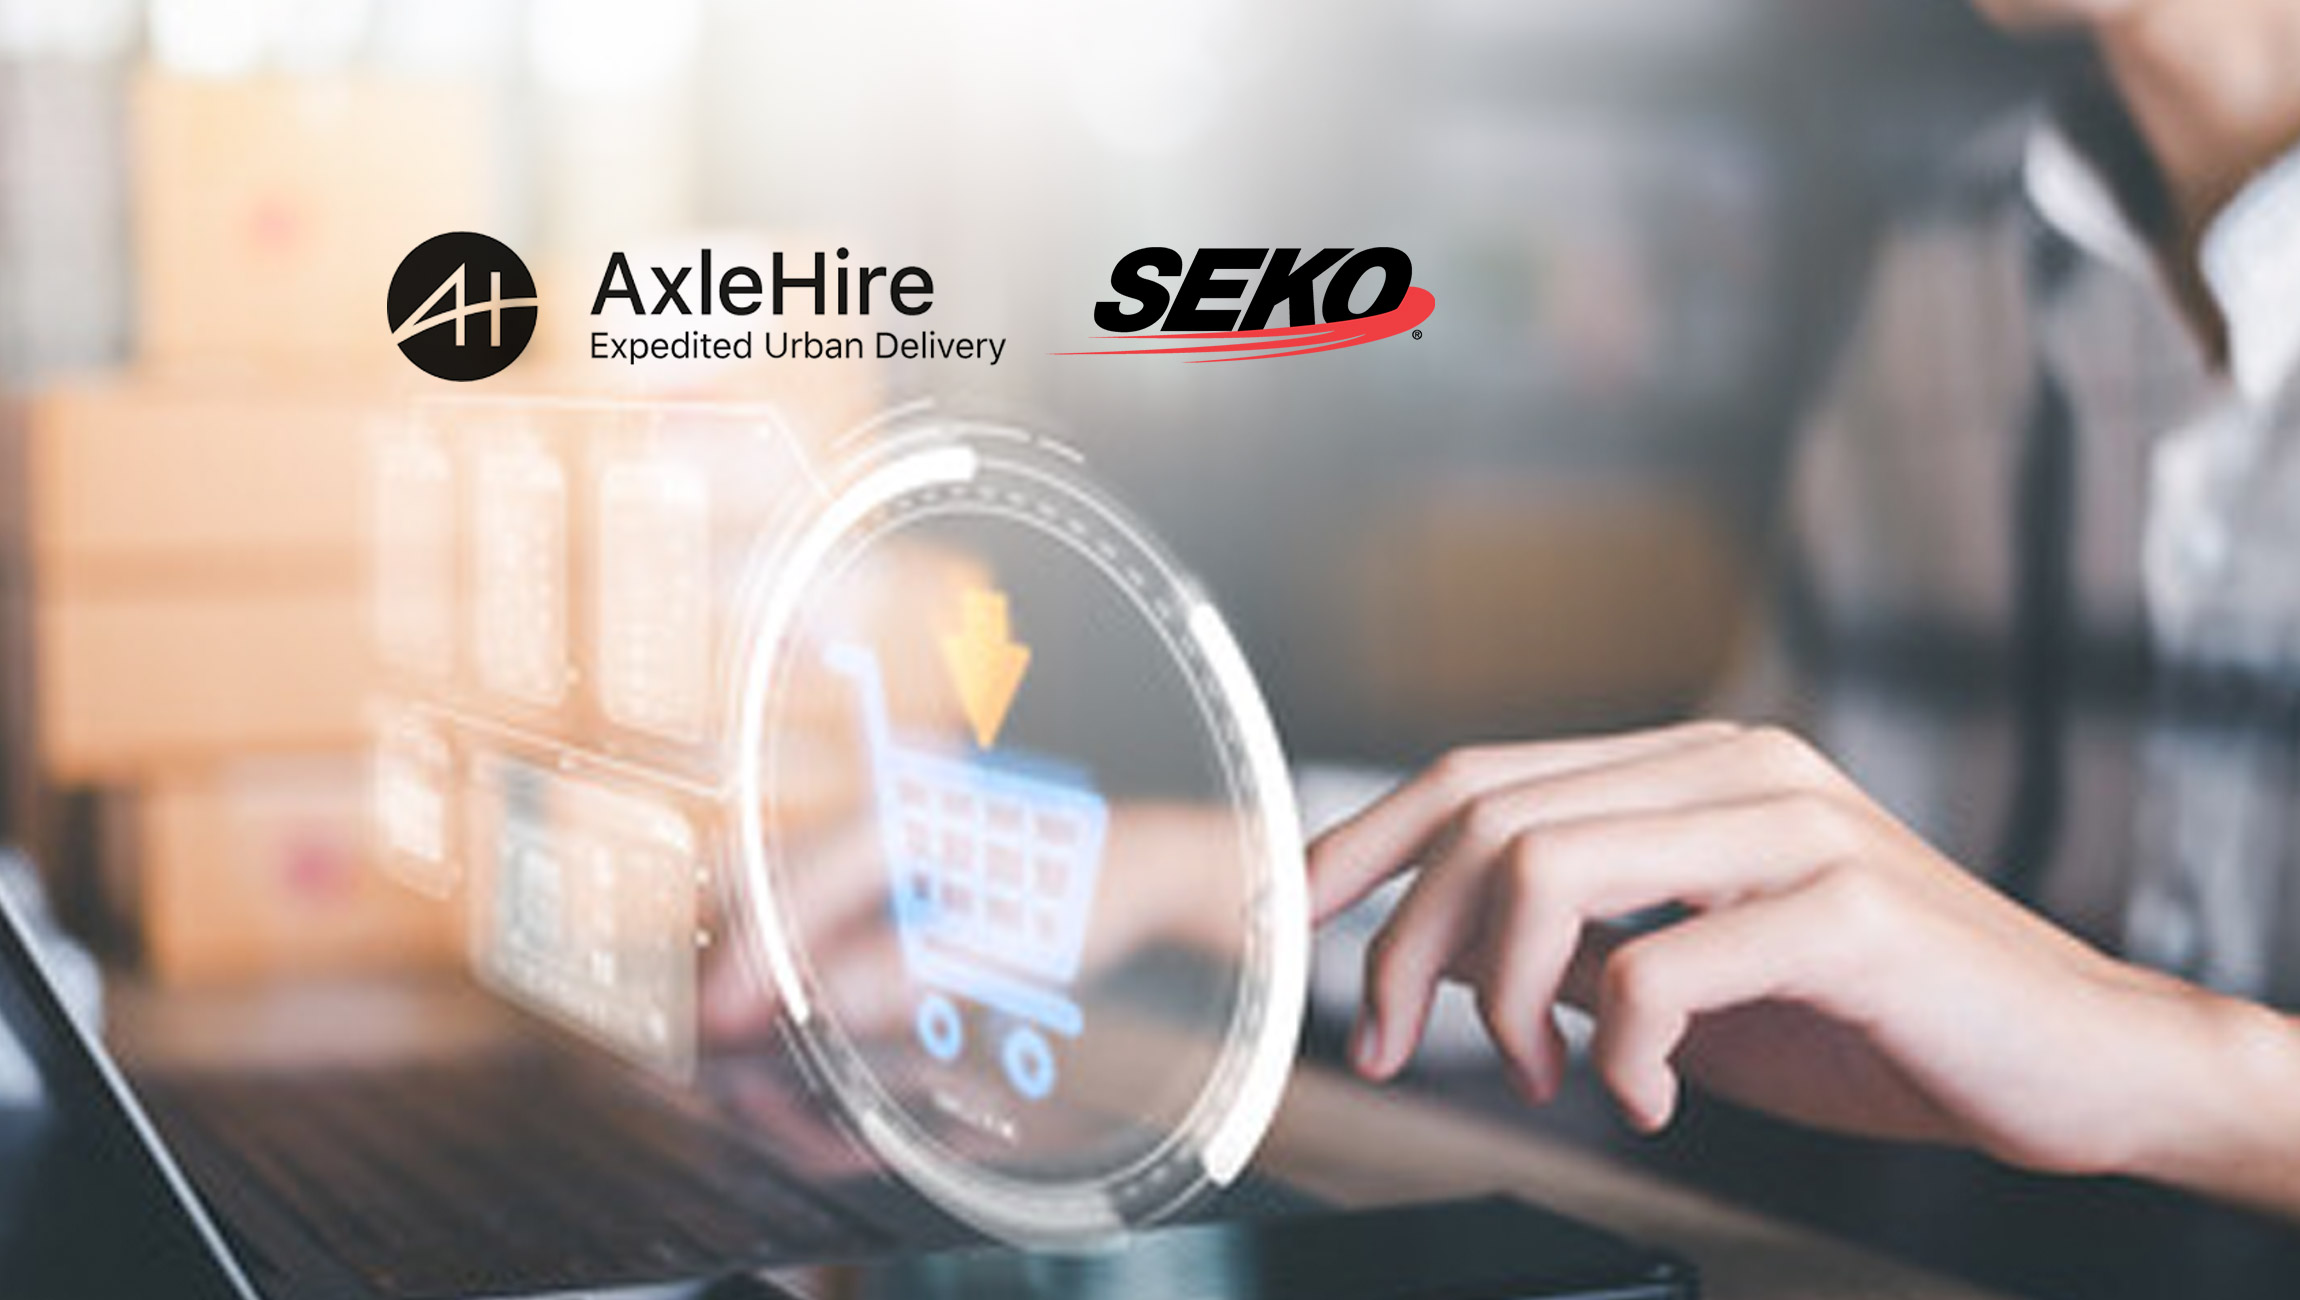 AxleHire Pioneers a New Last-Mile Delivery Model with Cross-Border Ecommerce SEKO Logistics as First Client